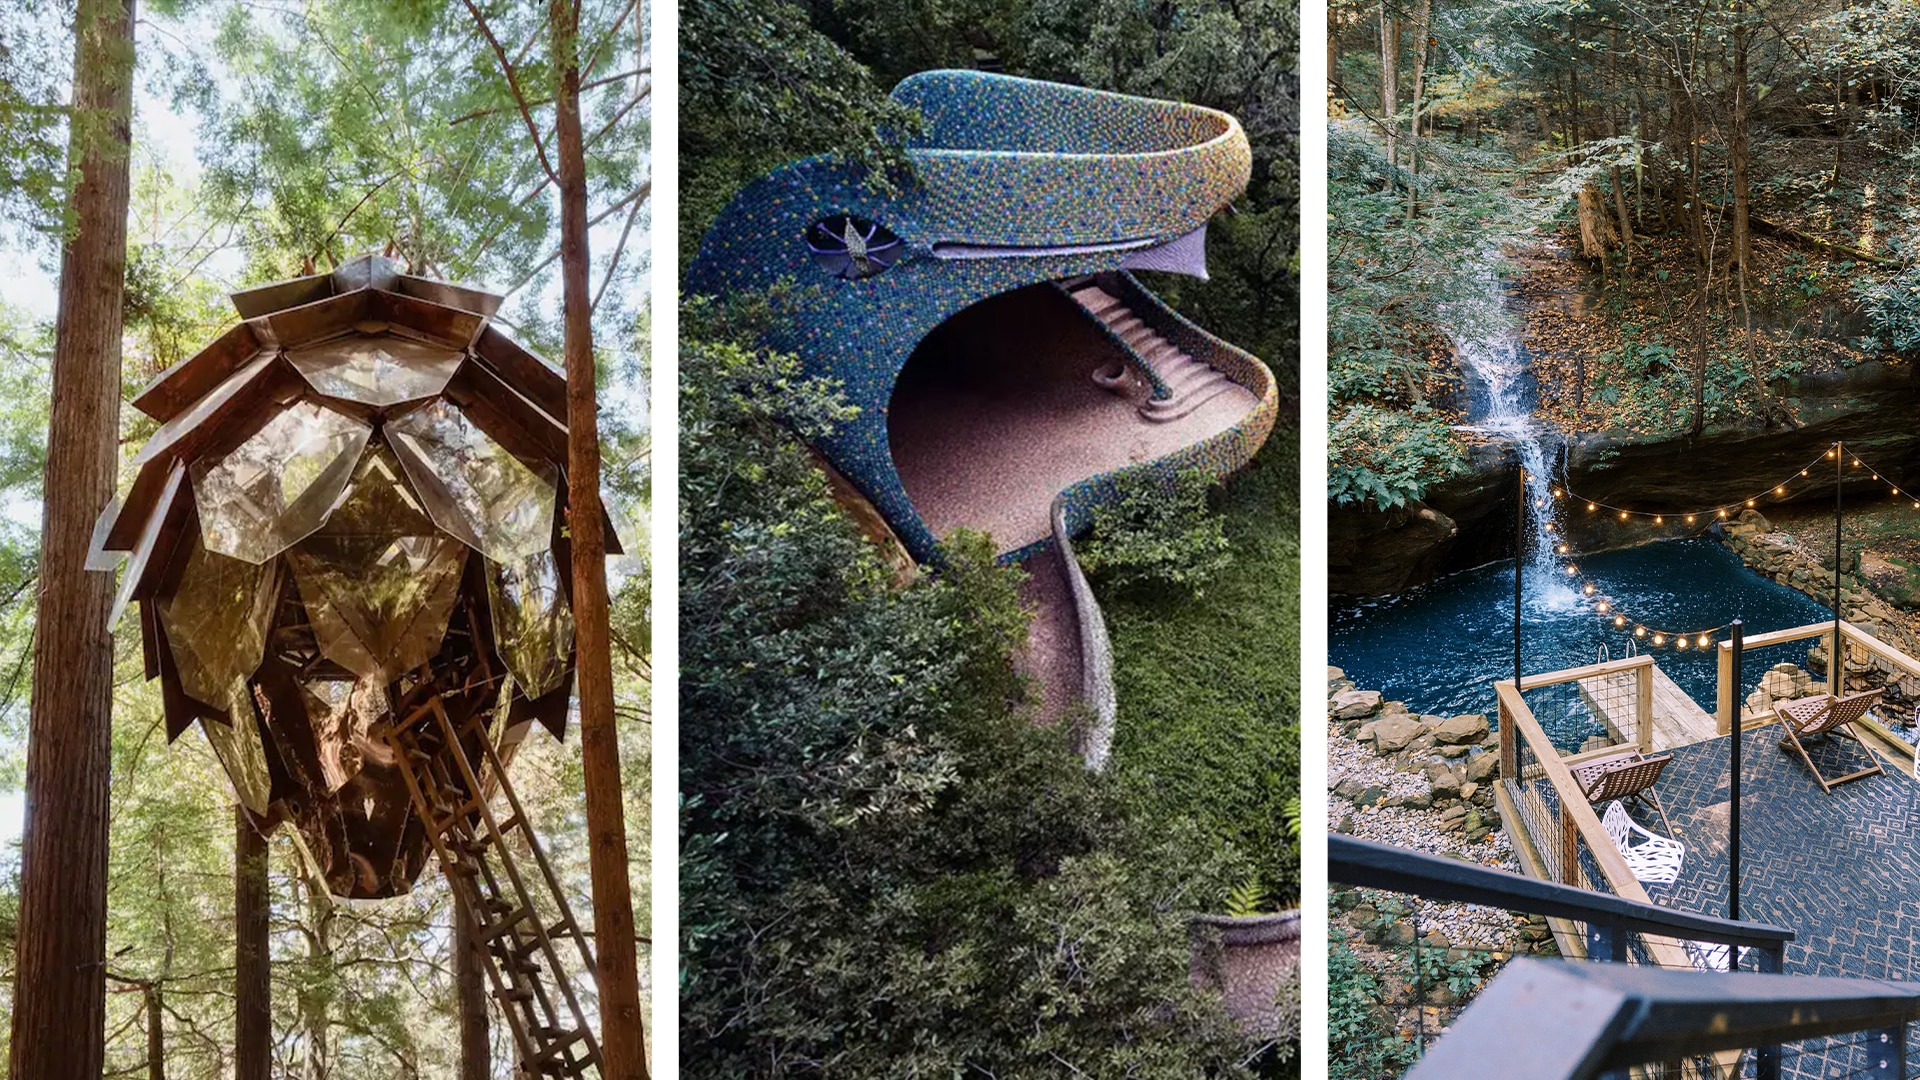 The Pinecone Treehouse, Quetzalcoatl’s Nest, and The Cantwell Lodge are among the beautiful Airbnb vacation abodes. (Credit: Airbnb)